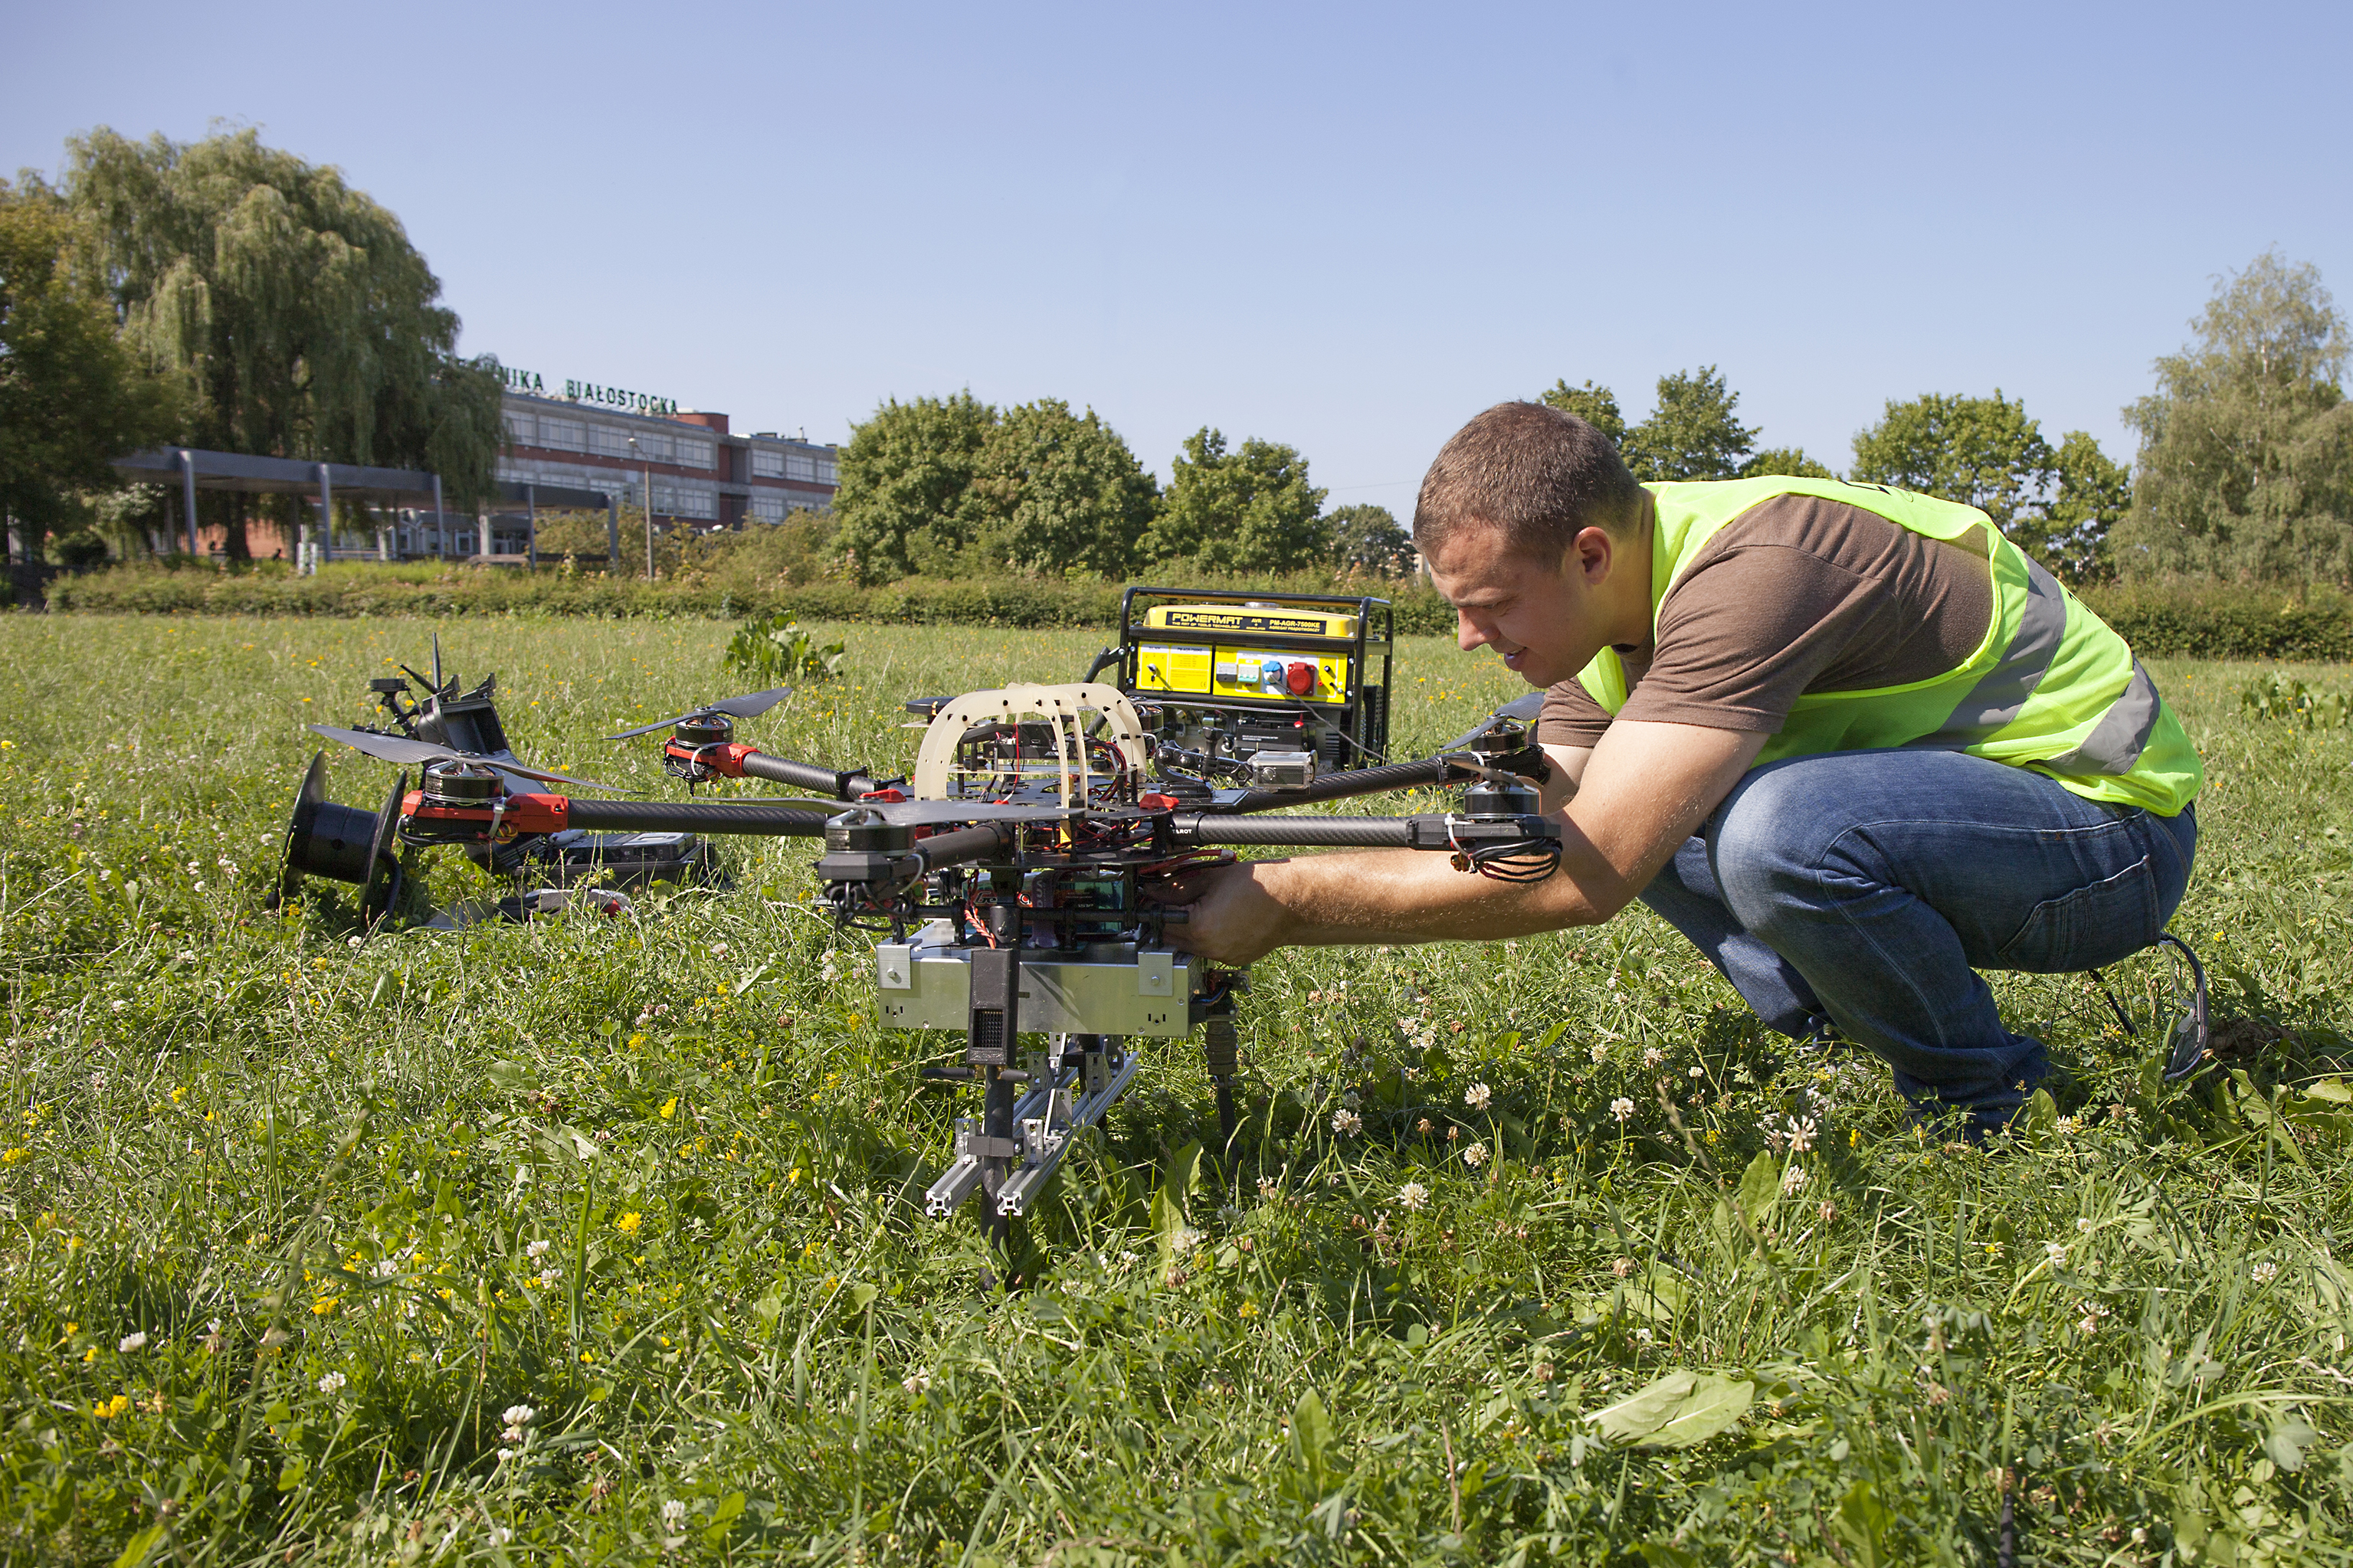 Tests of AVAL system components carried out at the Białystok University of Technology. In the photo, a man in a yellow protective vest is working on a drone in a meadow